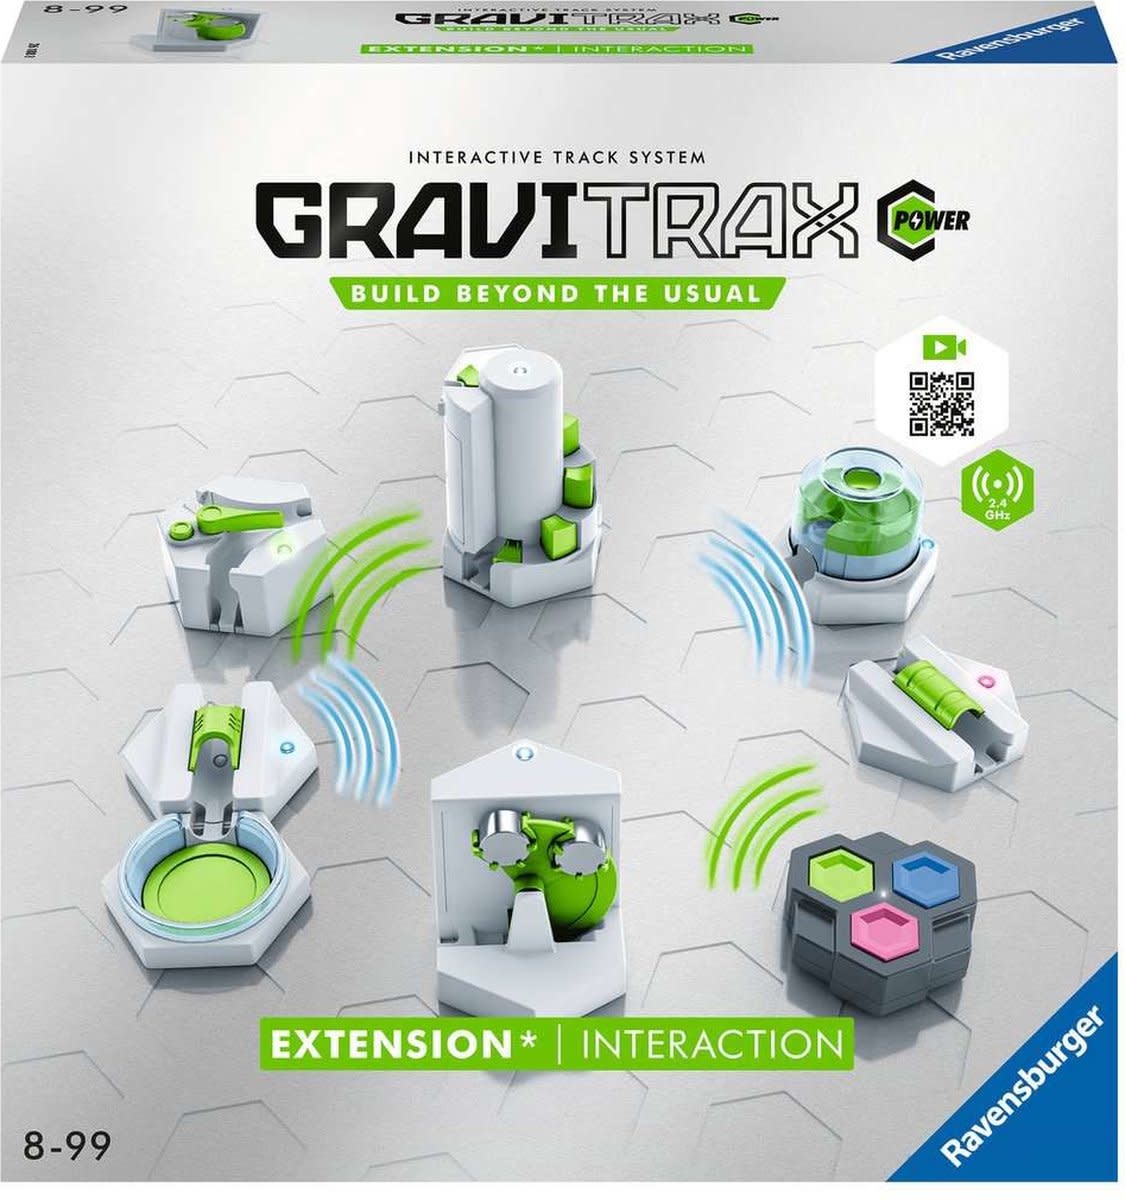 GraviTrax: Power - Extension Interaction